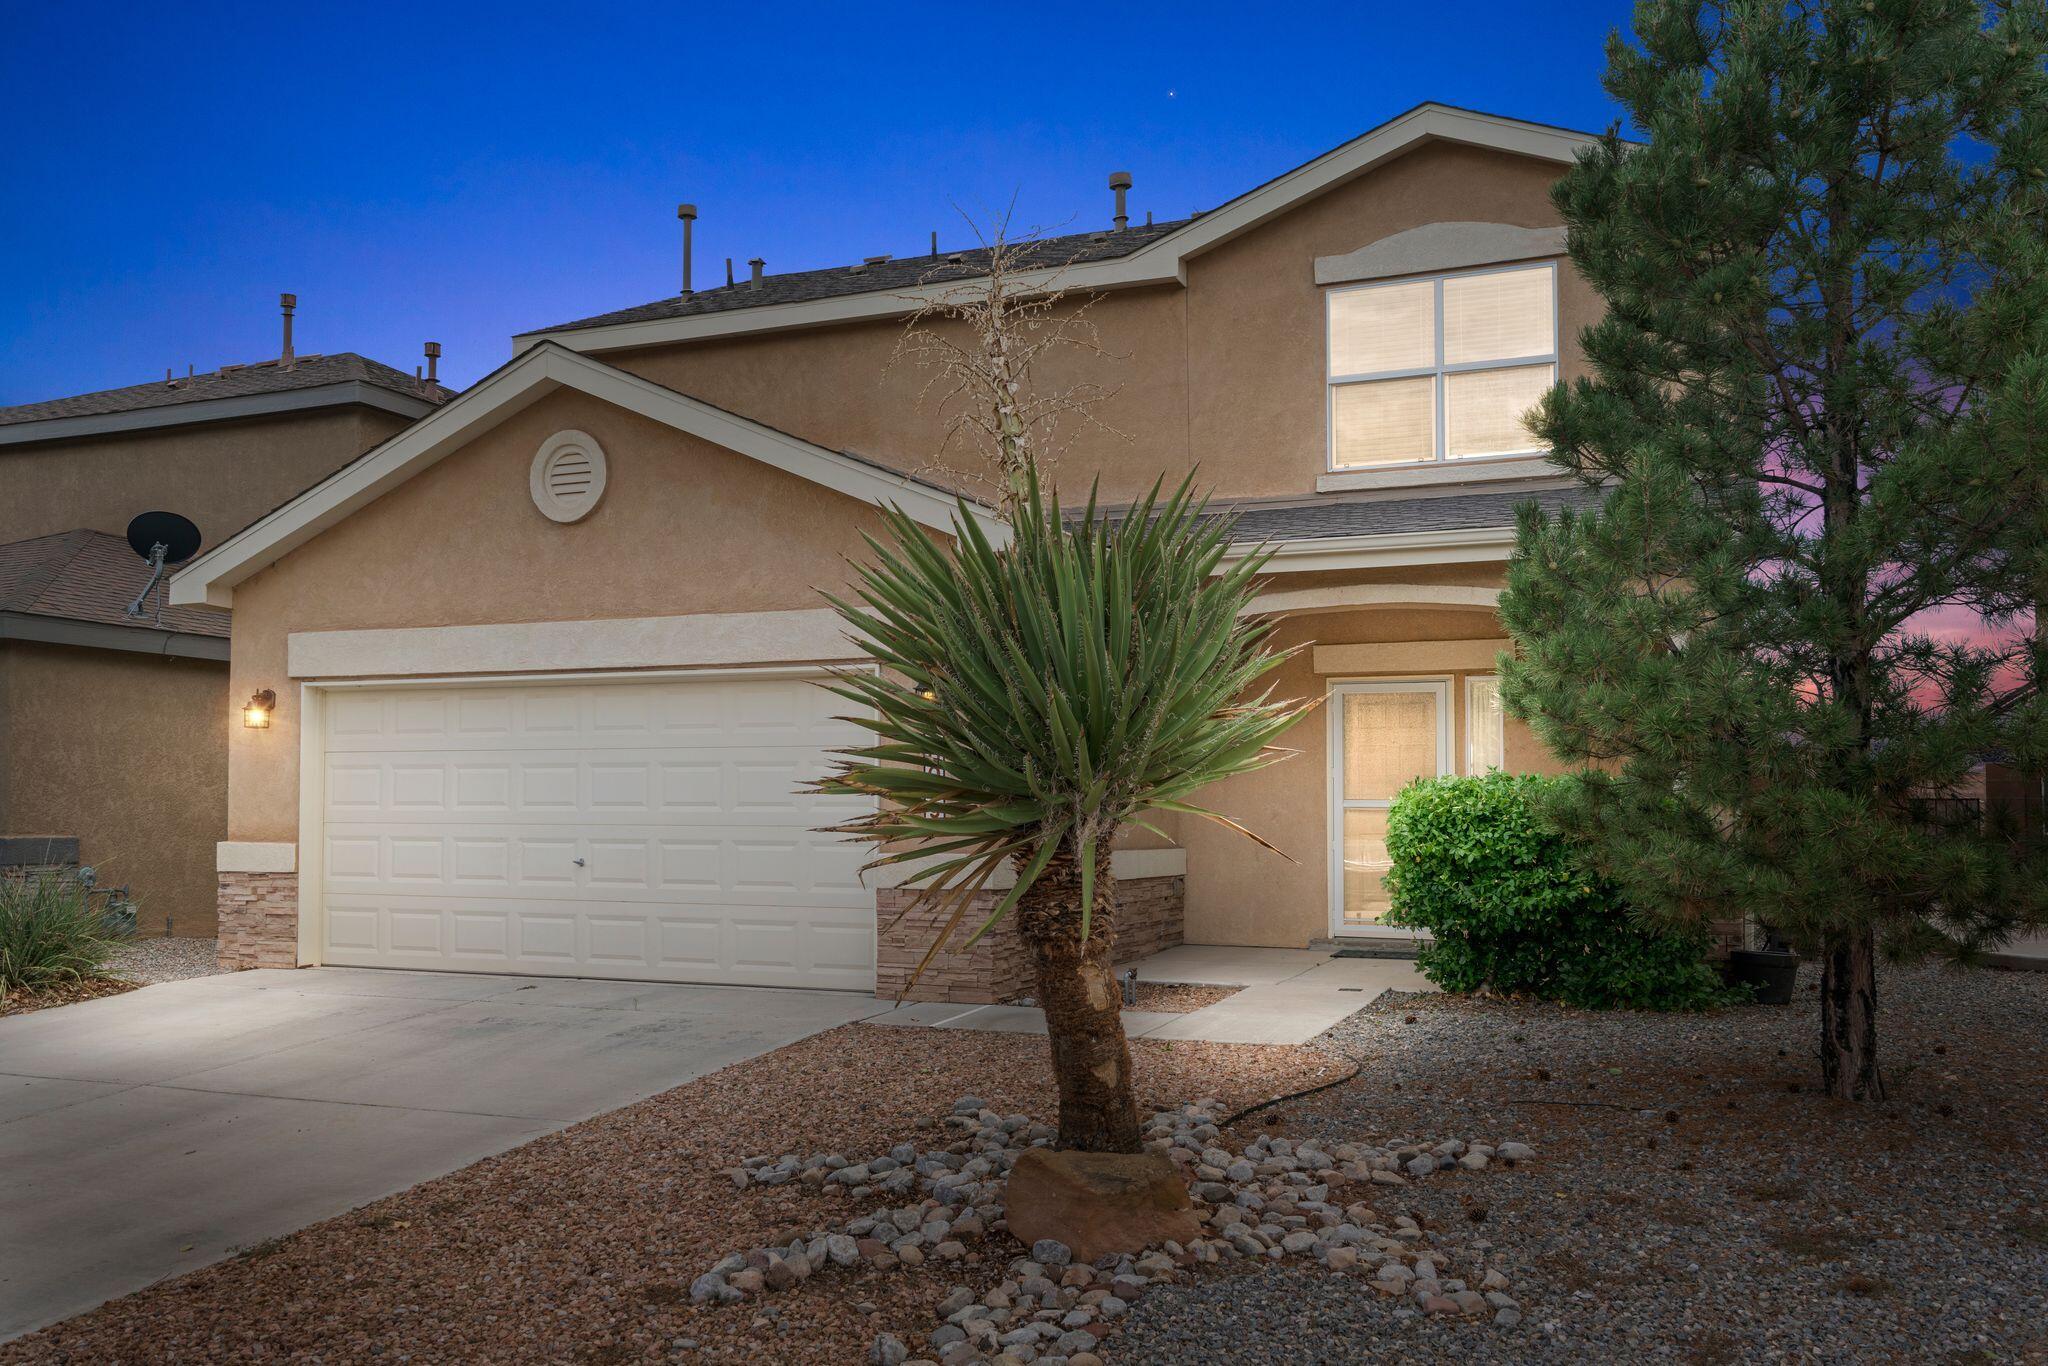 Meticulously maintained and updated two story home in the desirable Ventana Ranch West  neighborhood.  This homes boasts an amazing back yard with built in fire pit perfect for entertaining. There is wood flooring downstairs, with updated back splash, and single farm house deep sink in kitchen.